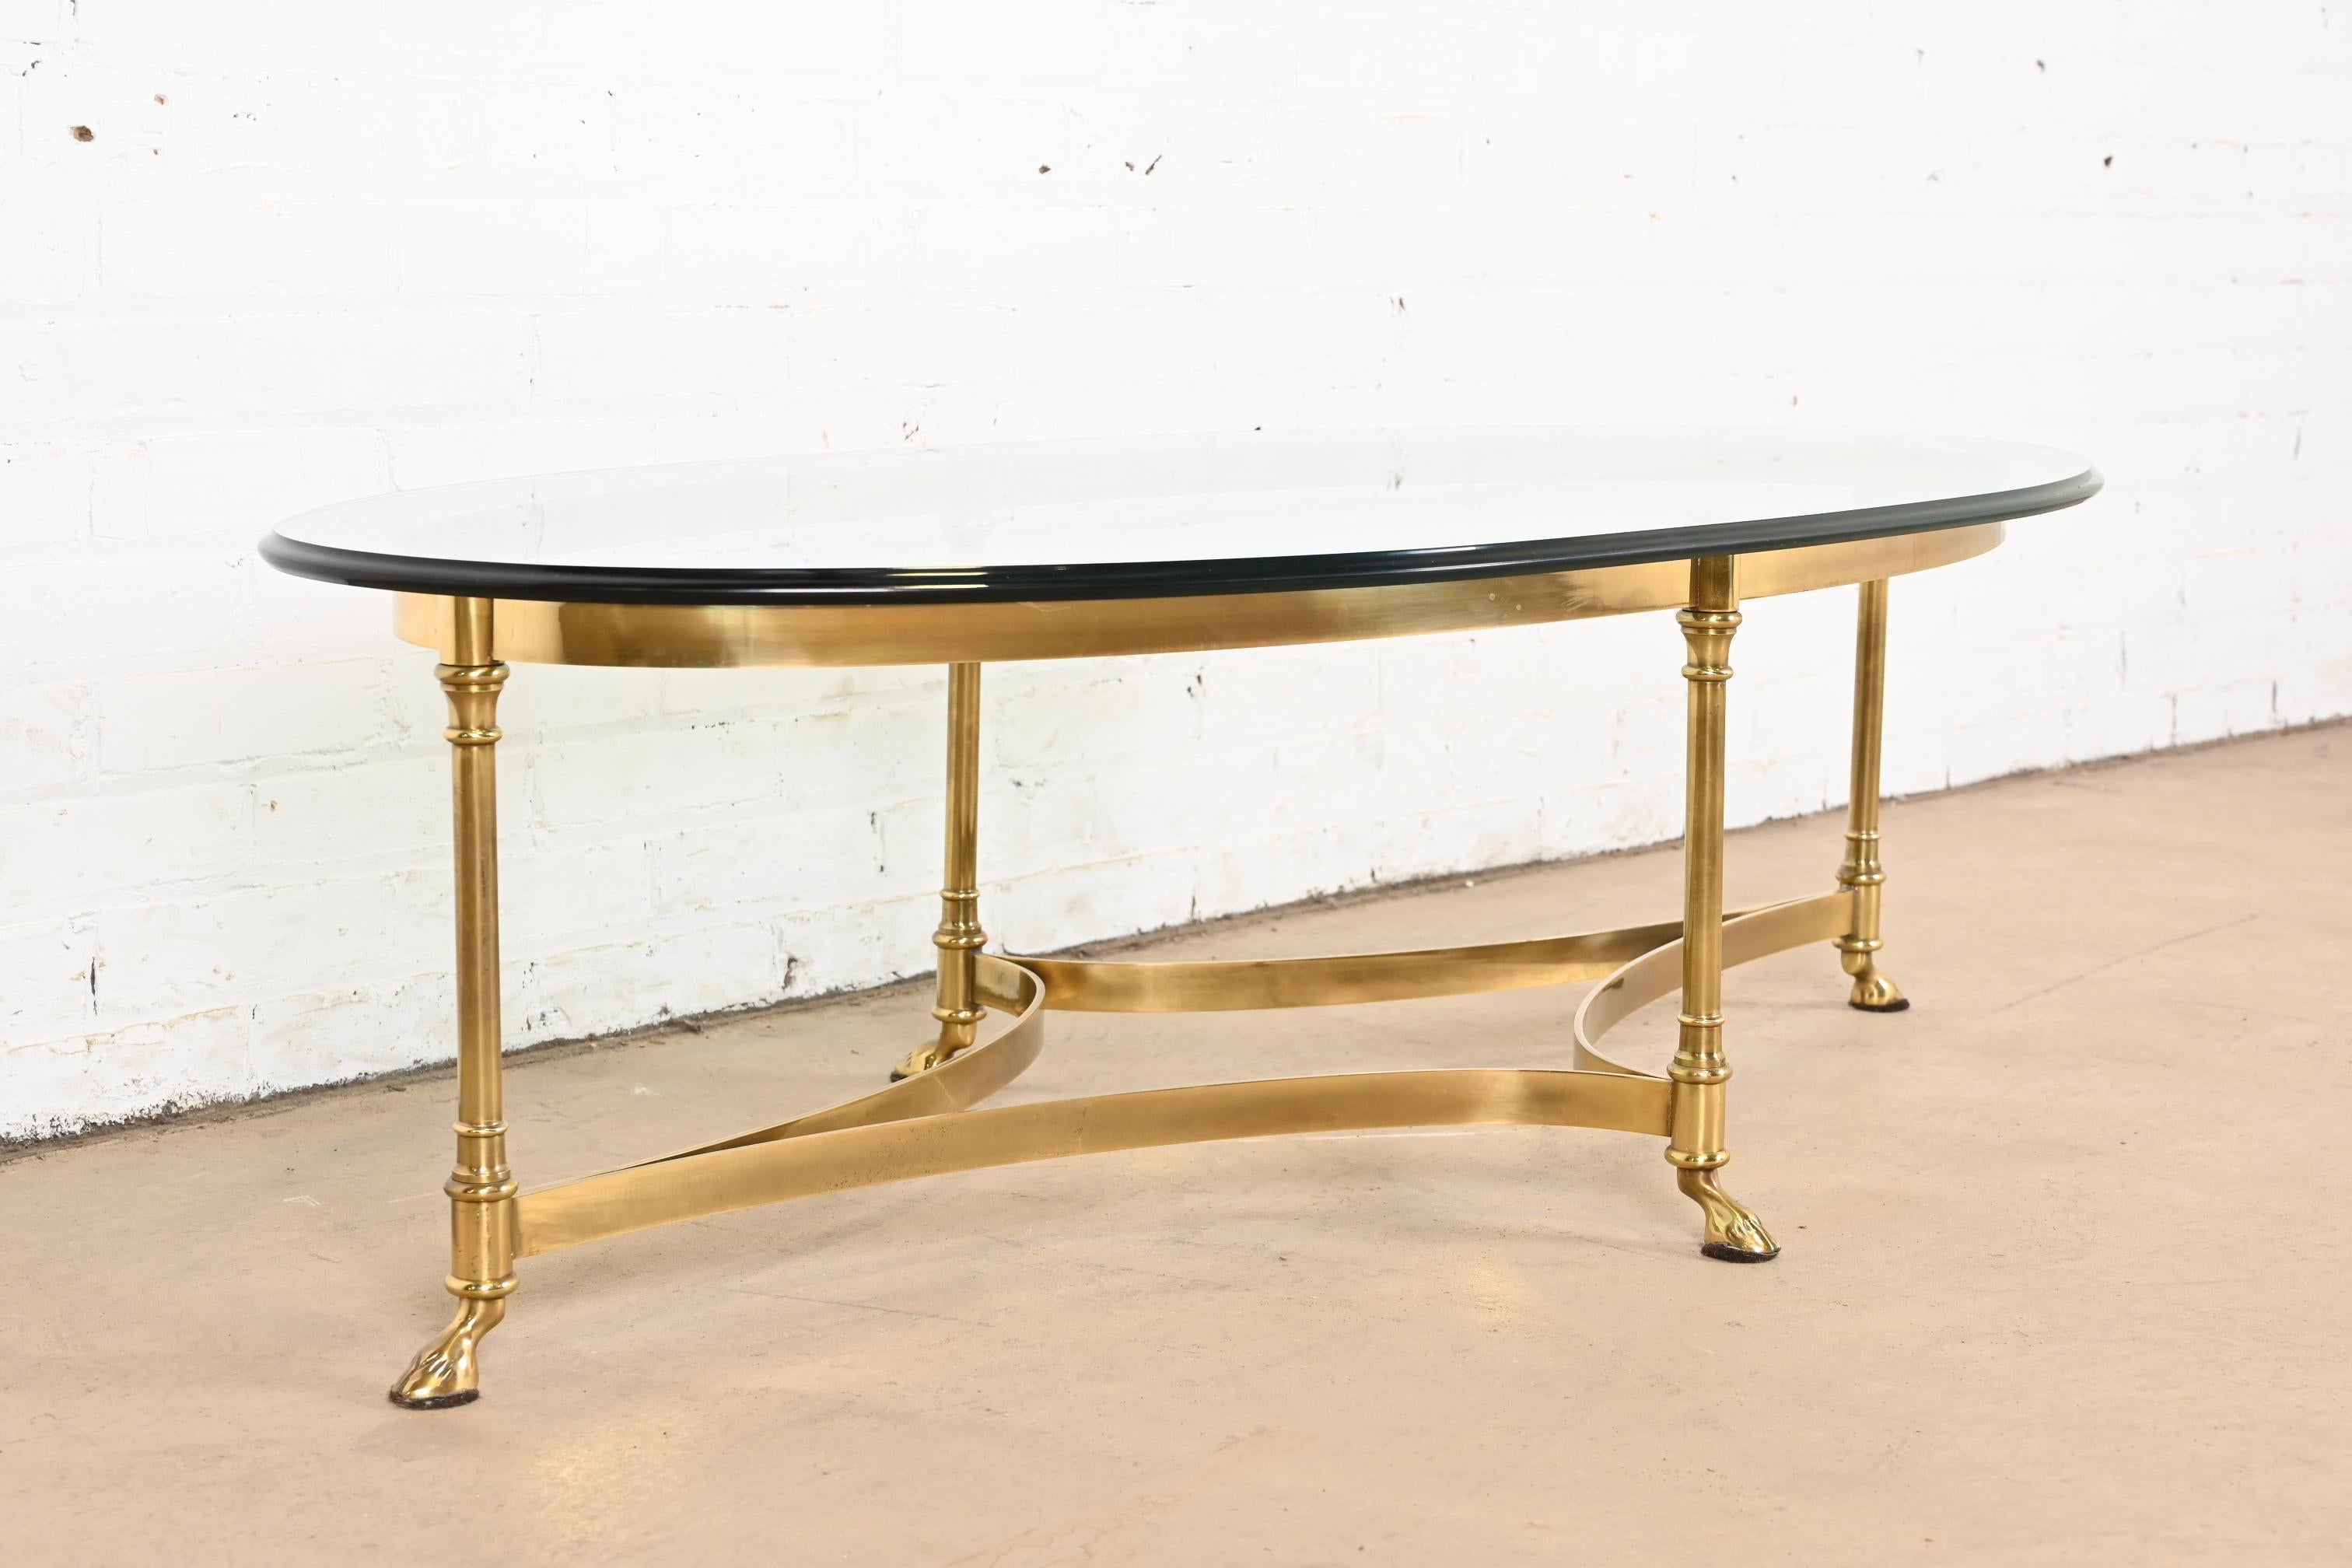 Labarge Hollywood Regency Brass and Glass Hooved Feet Cocktail Table, 1960s 1